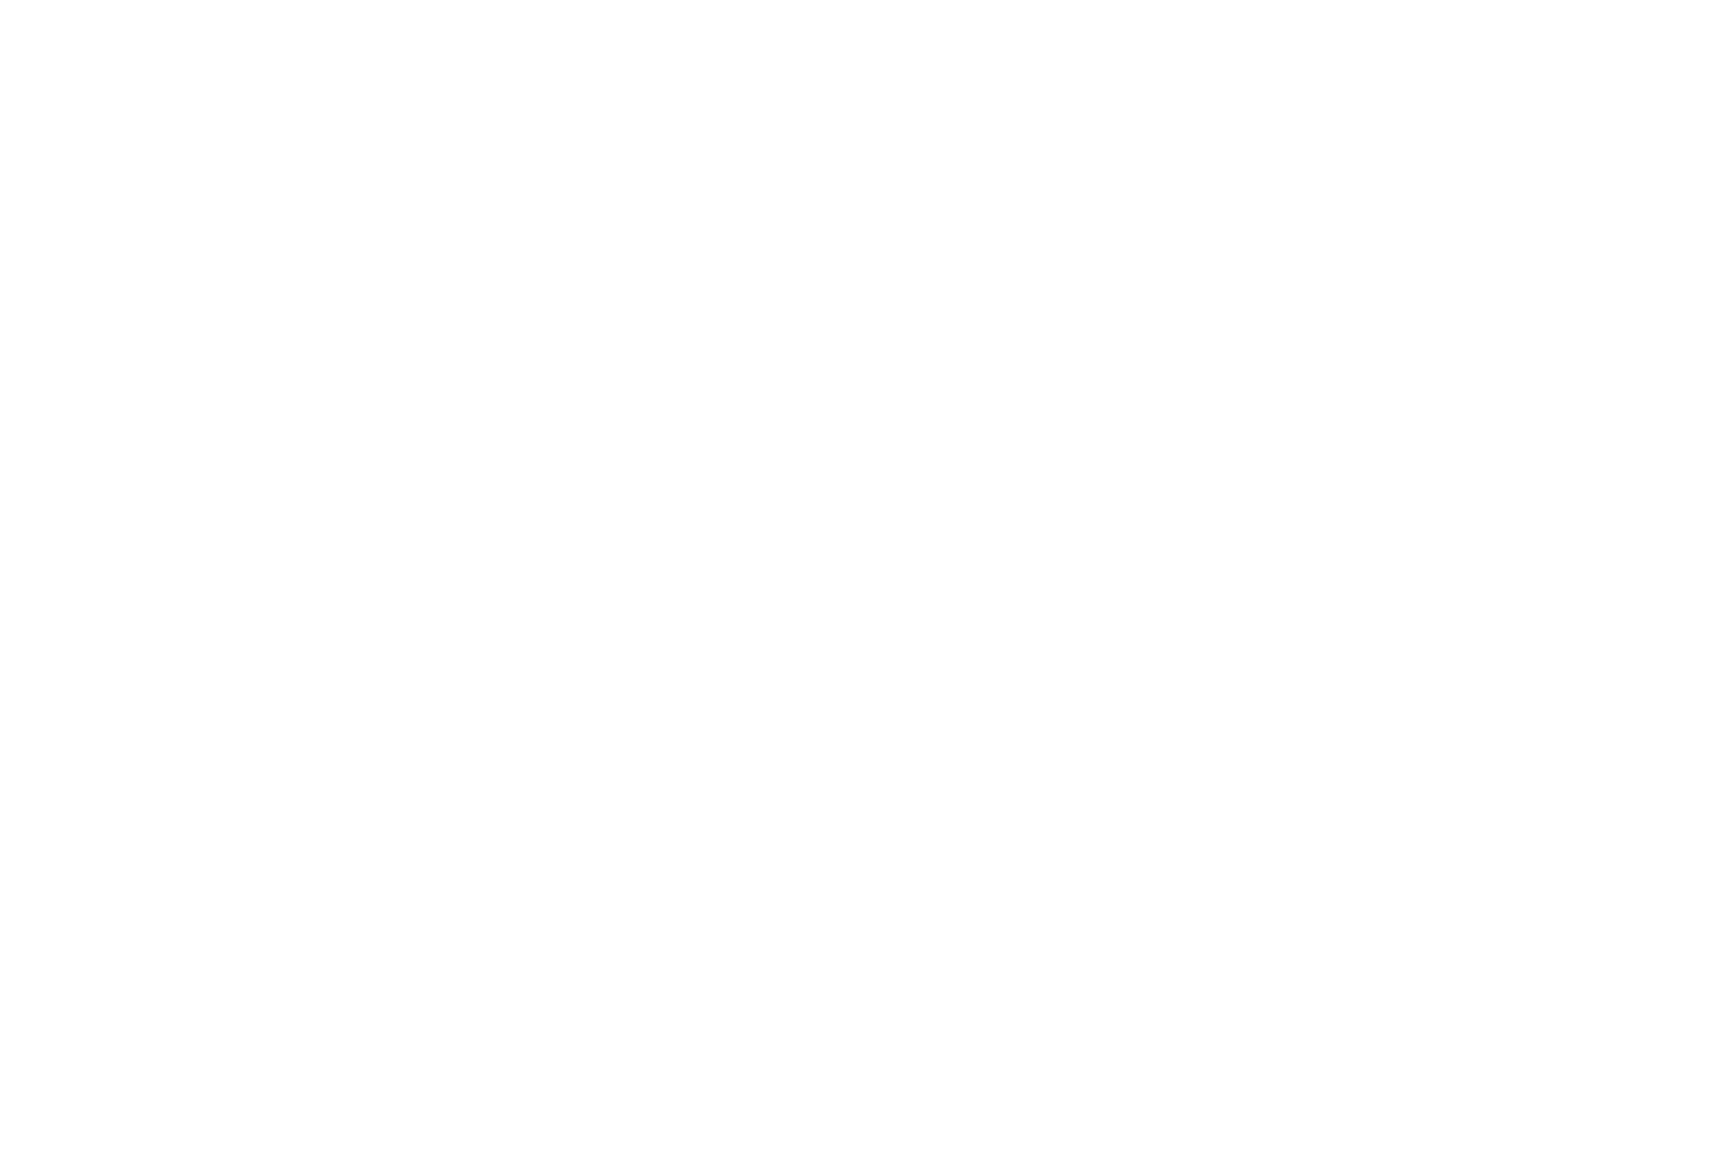 WINNER  - BEST ACTRESS IN A SHORT FILM  - CHAIN NYC FILM FESTIVAL 2016 (1).png